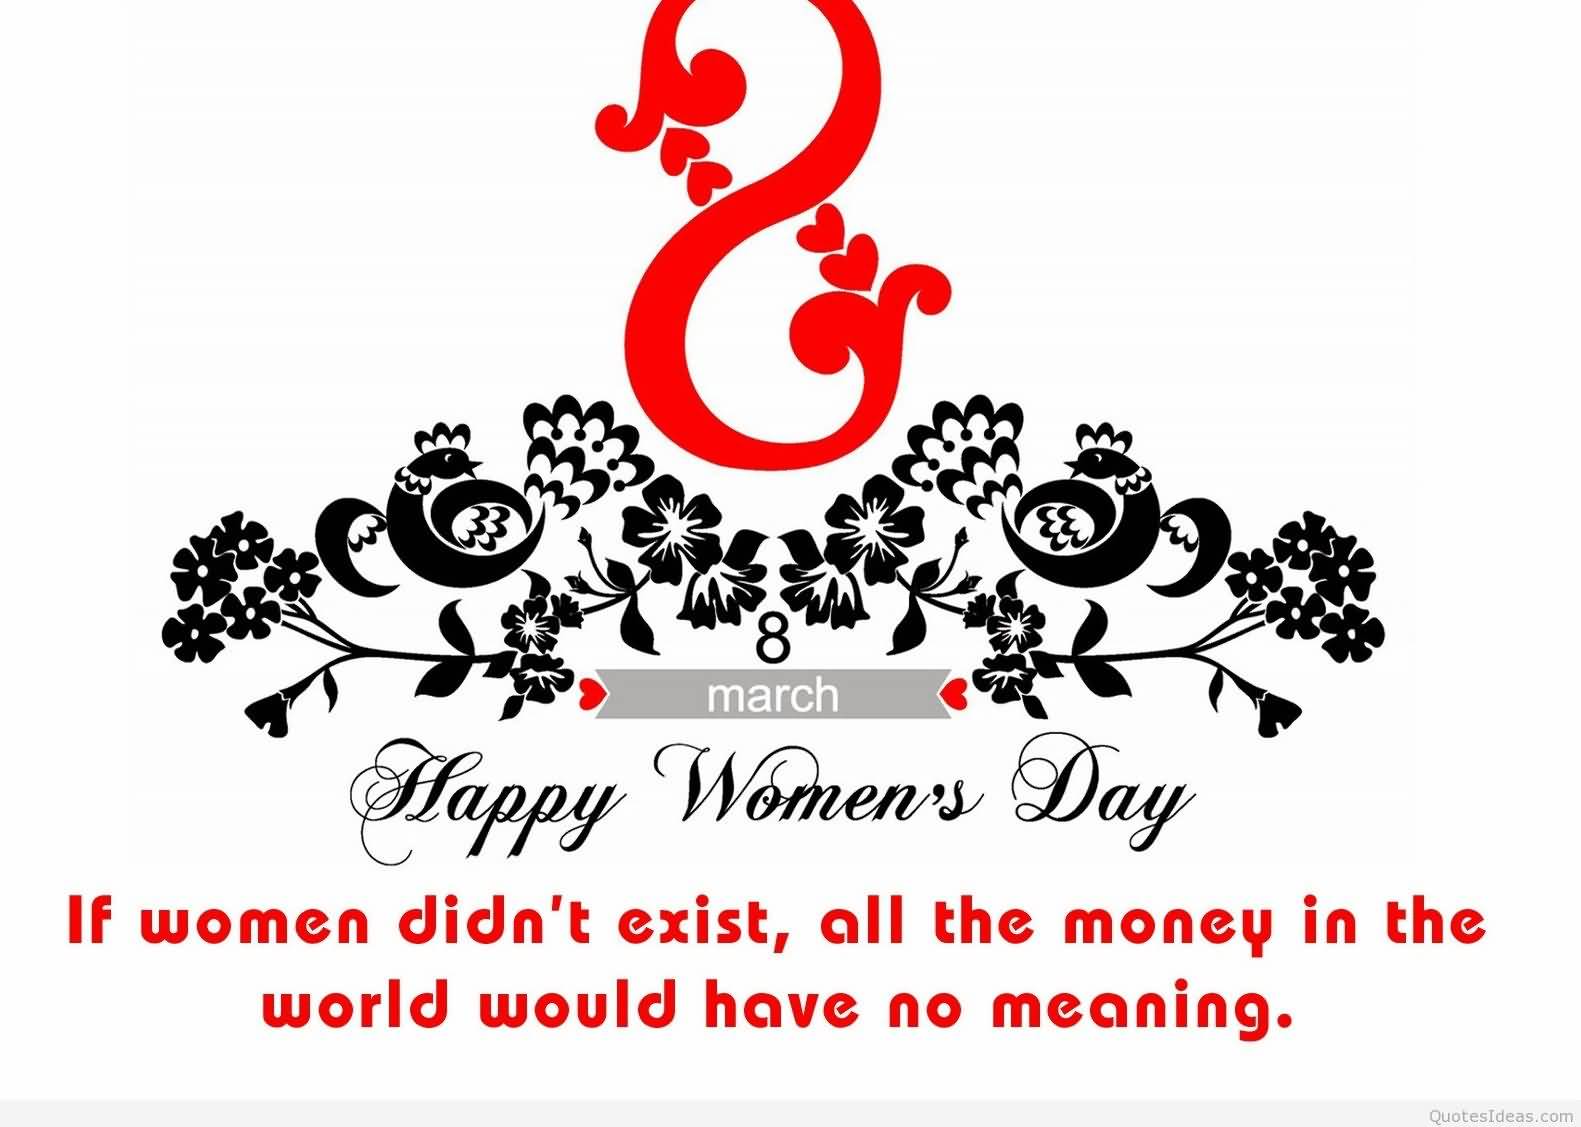 Happy Women's Day If Women Didn't Exist, All The Money In The World Would Have No Meaning